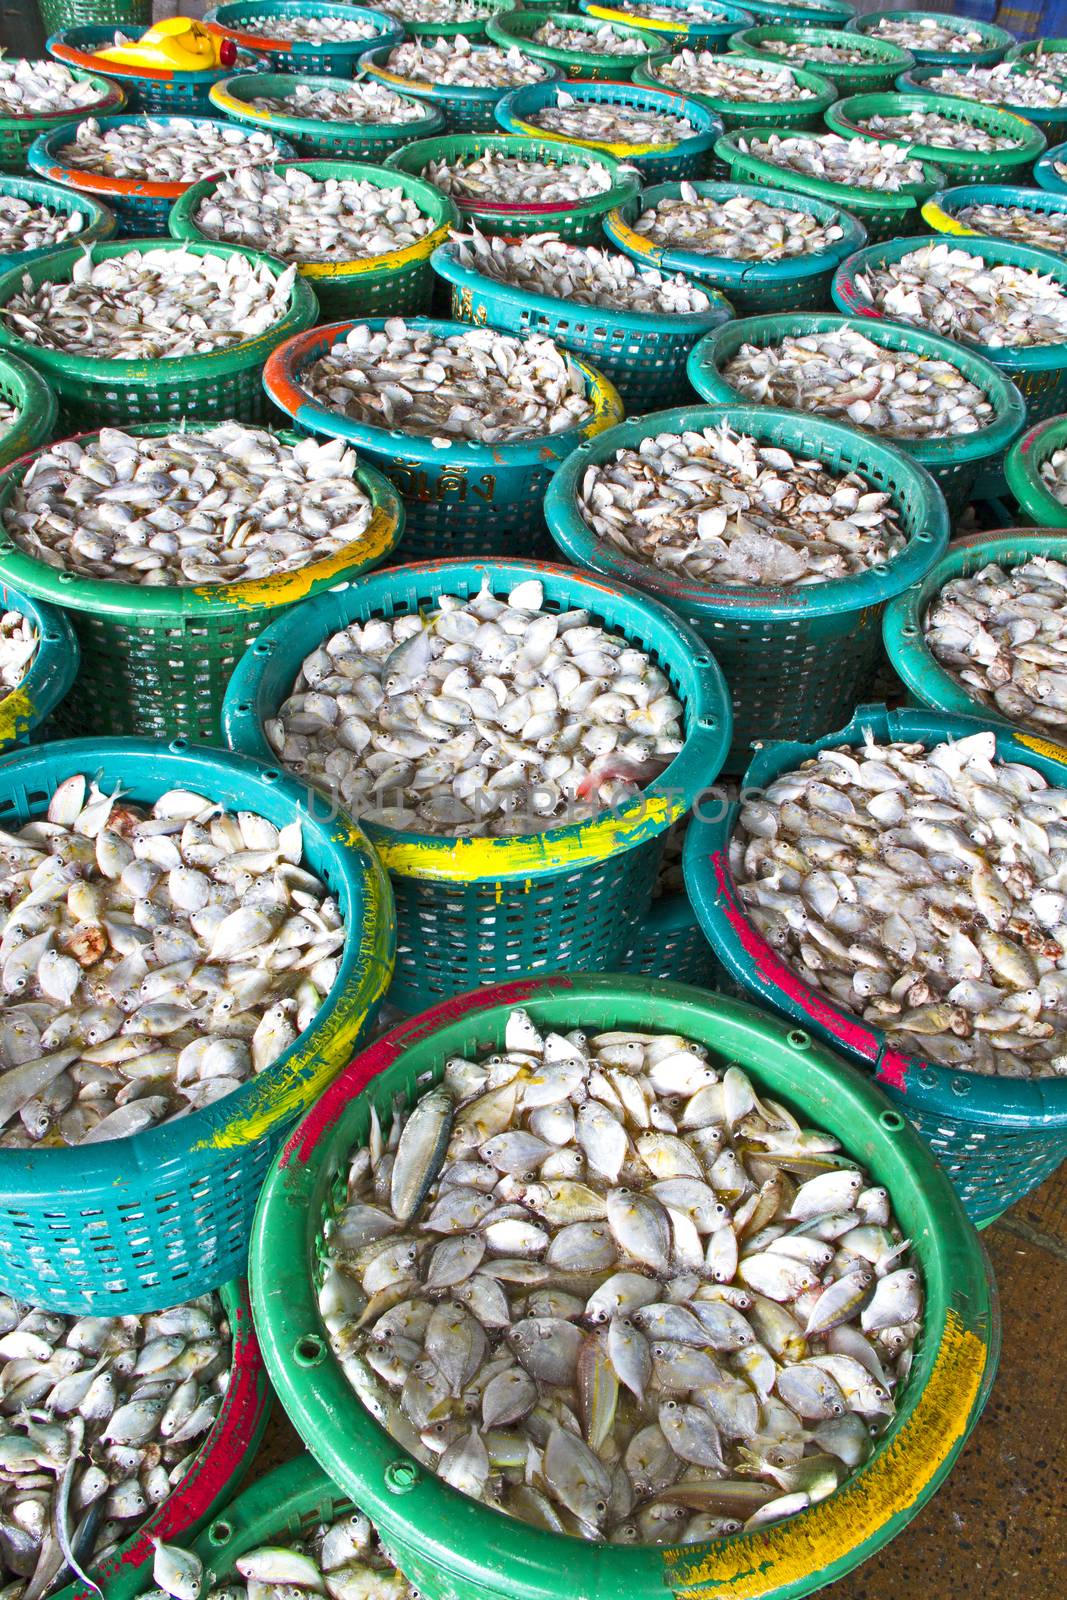 Many small fish for trading of fishermen,industrial fish packaging.